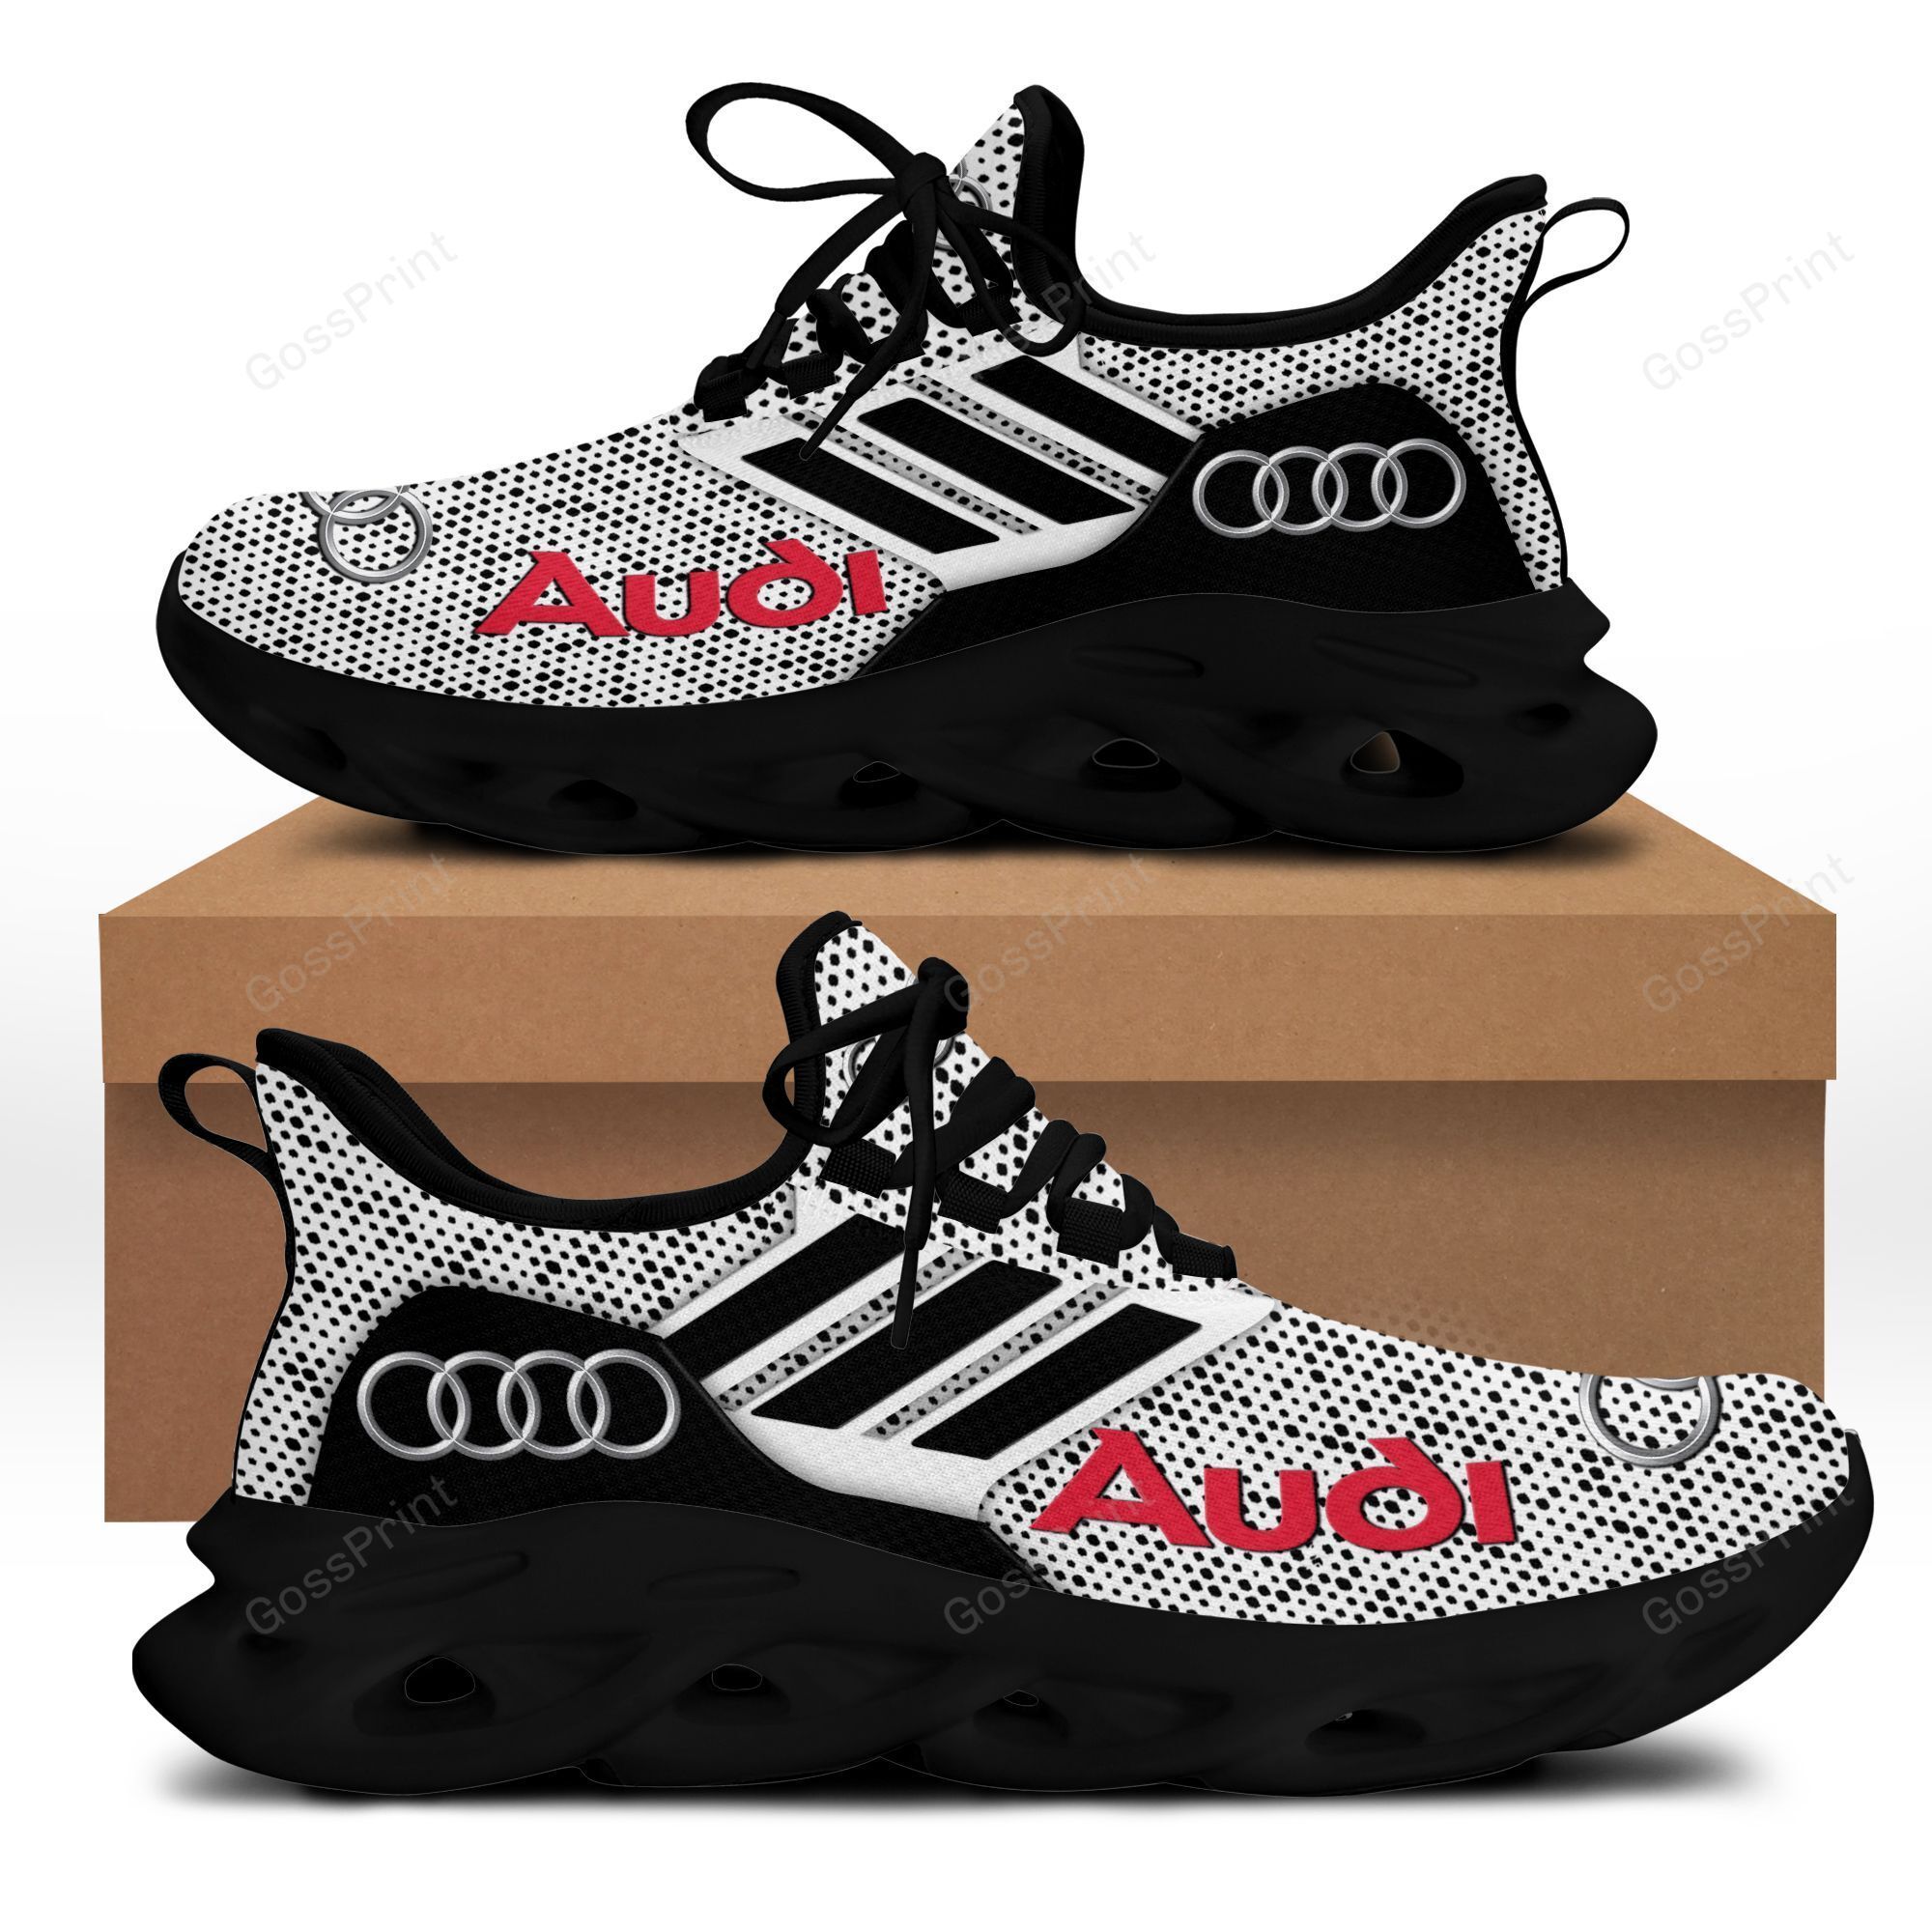 Audi Running Shoes Ver 2 – Ride Clothing Shop